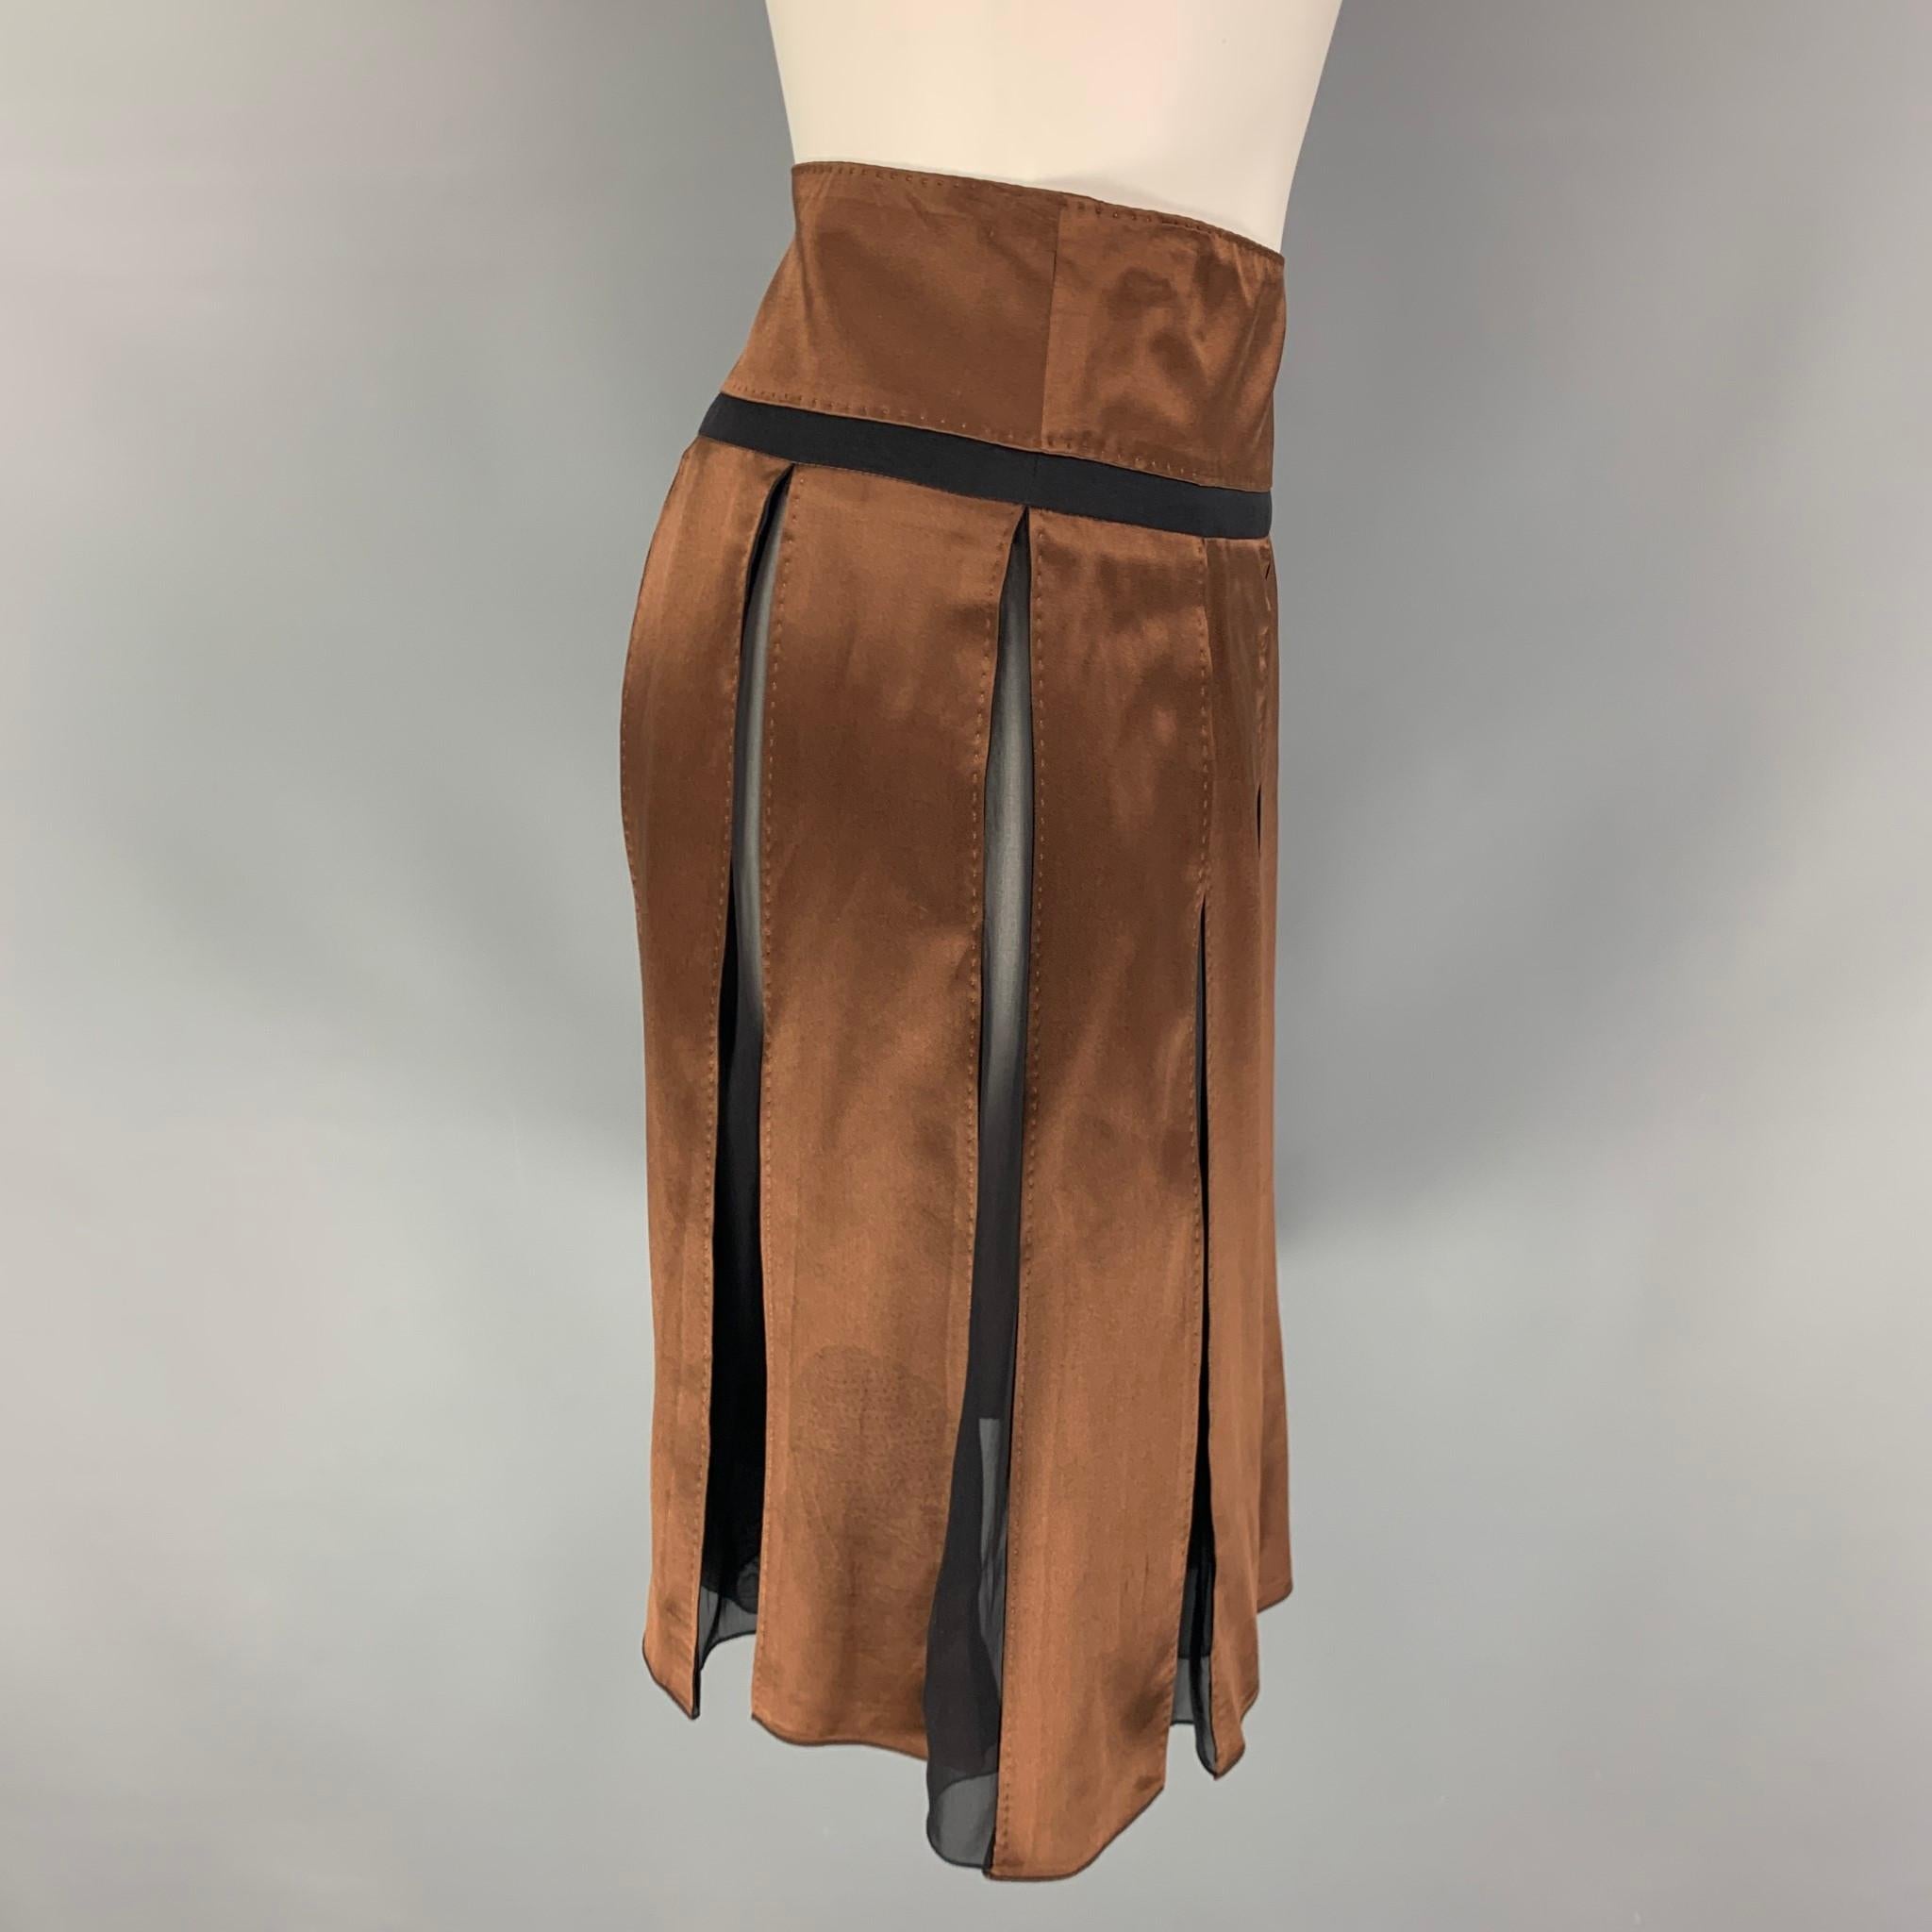 CHLOE skirt comes in a brown & black satin silk featuring a pleated style, high waisted, and a back zipper closure. Made in France. 

Very Good Pre-Owned Condition.
Marked: T 36

Measurements:

Waist: 28 in.
Hip: 32 in.
Length: 22 in.